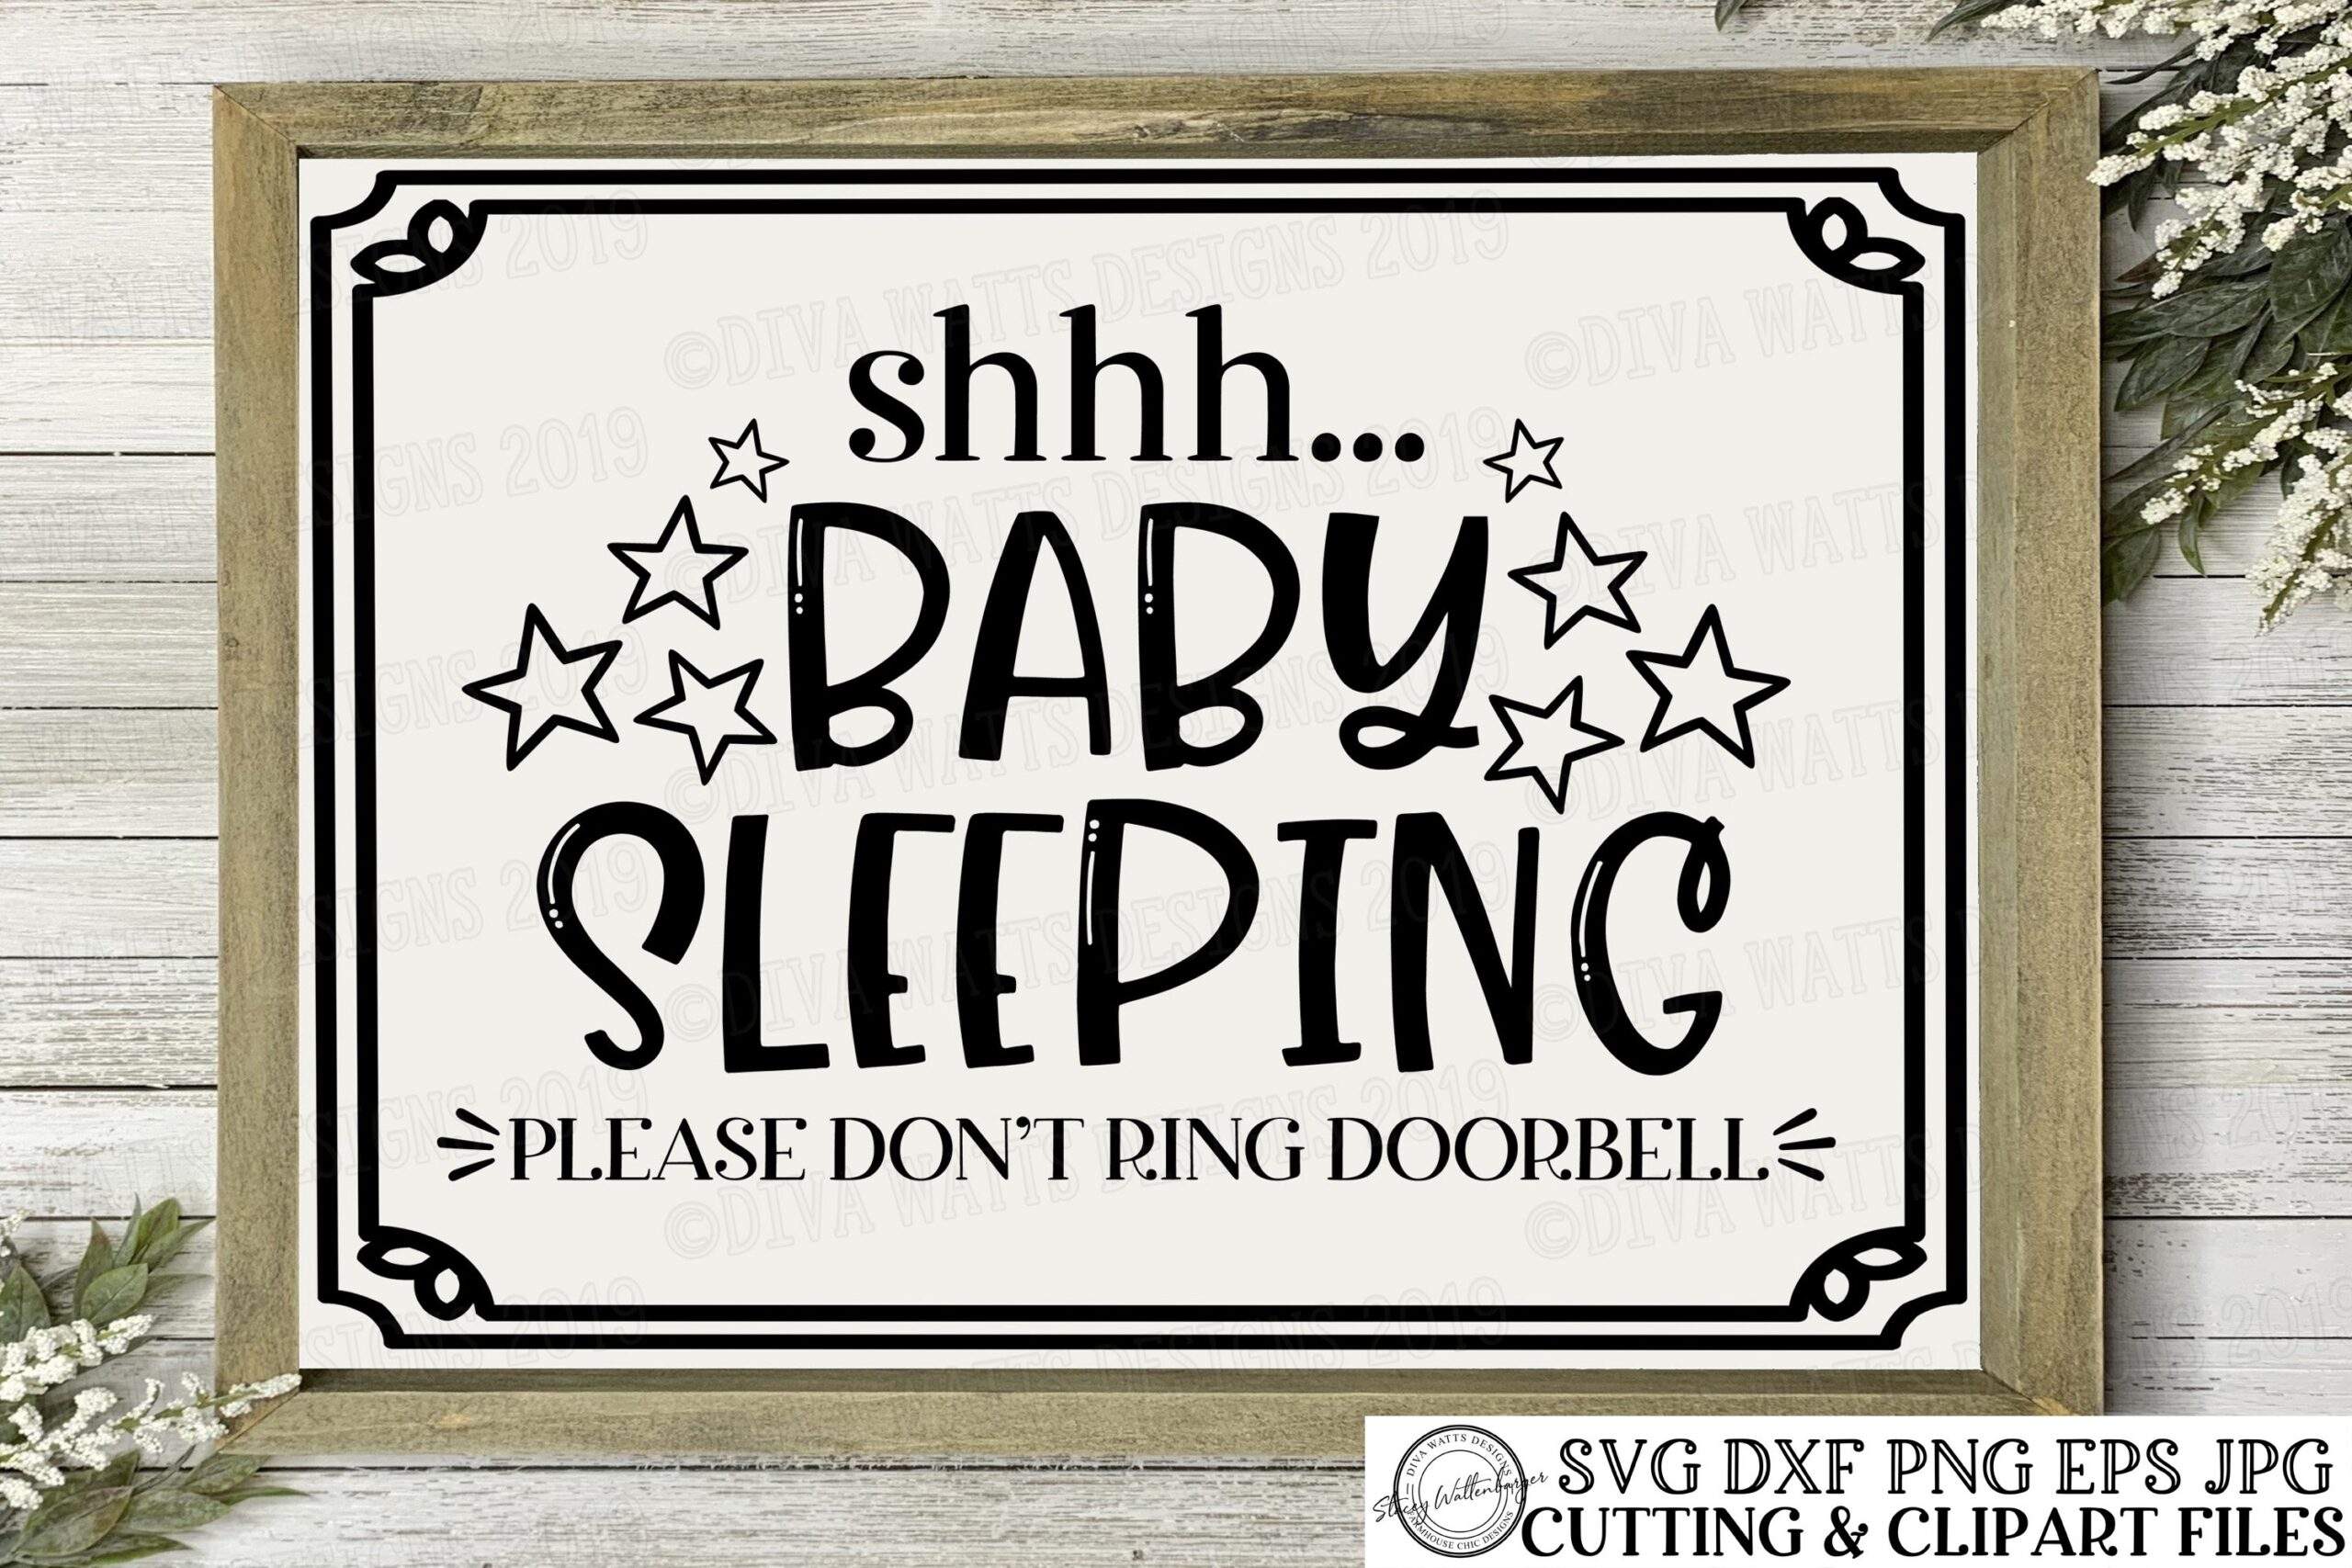 Shhh Baby Sleeping Please Don t Ring Doorbell Cut File